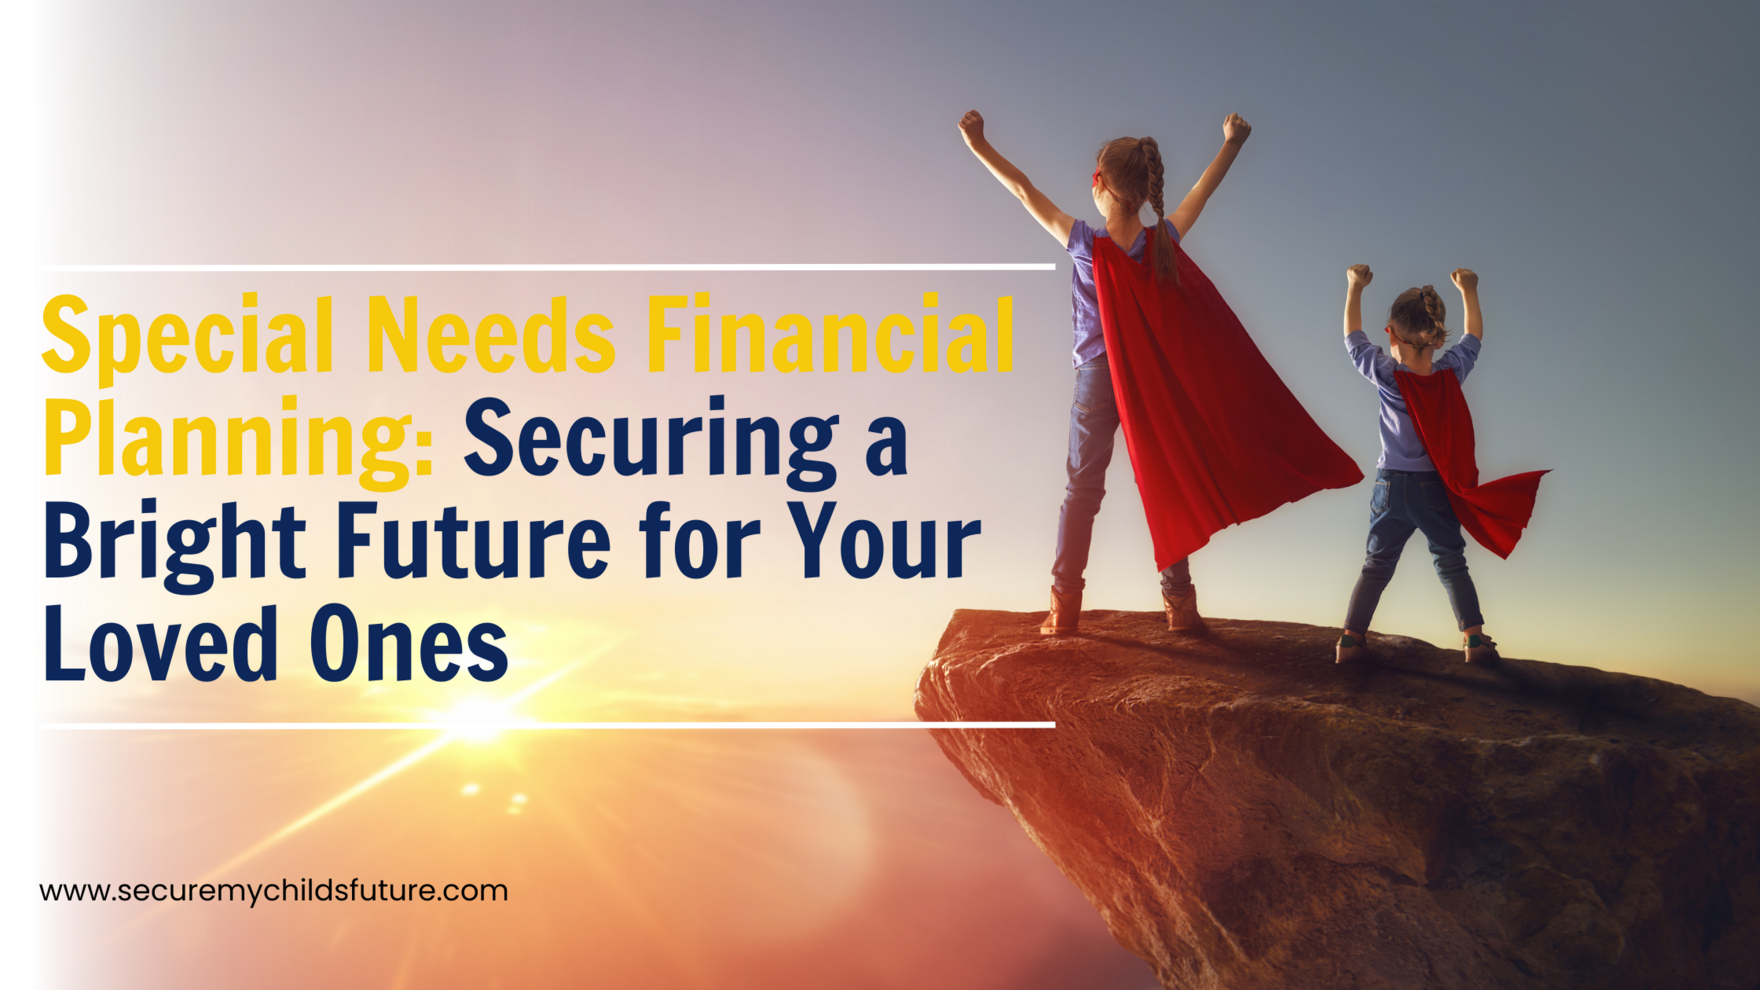 Special Needs Financial Planning Securing a Bright Future for Your Loved Ones